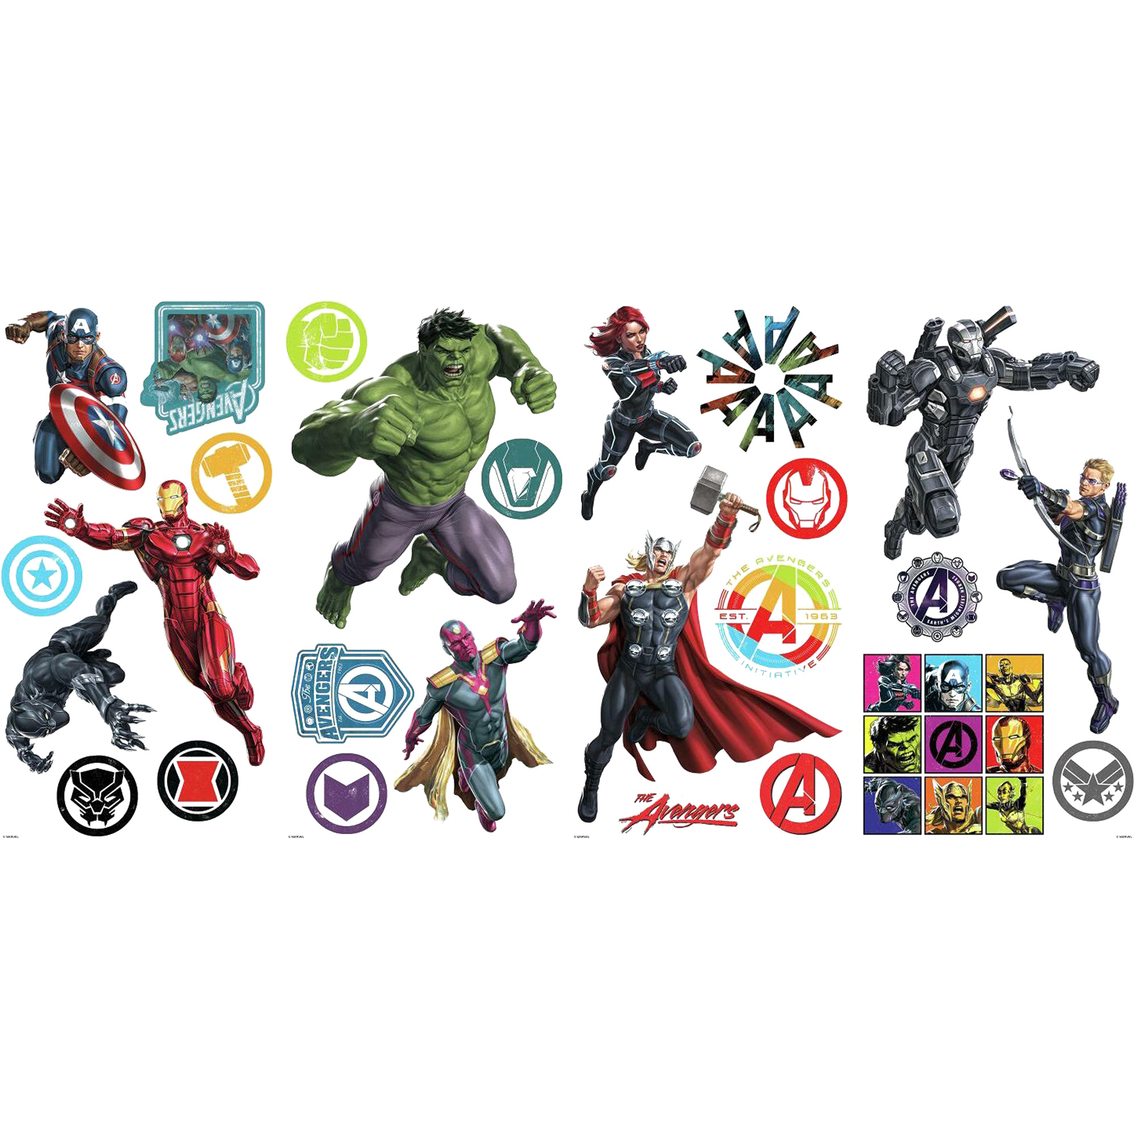 RoomMates Classic Avengers Decals - Image 2 of 5